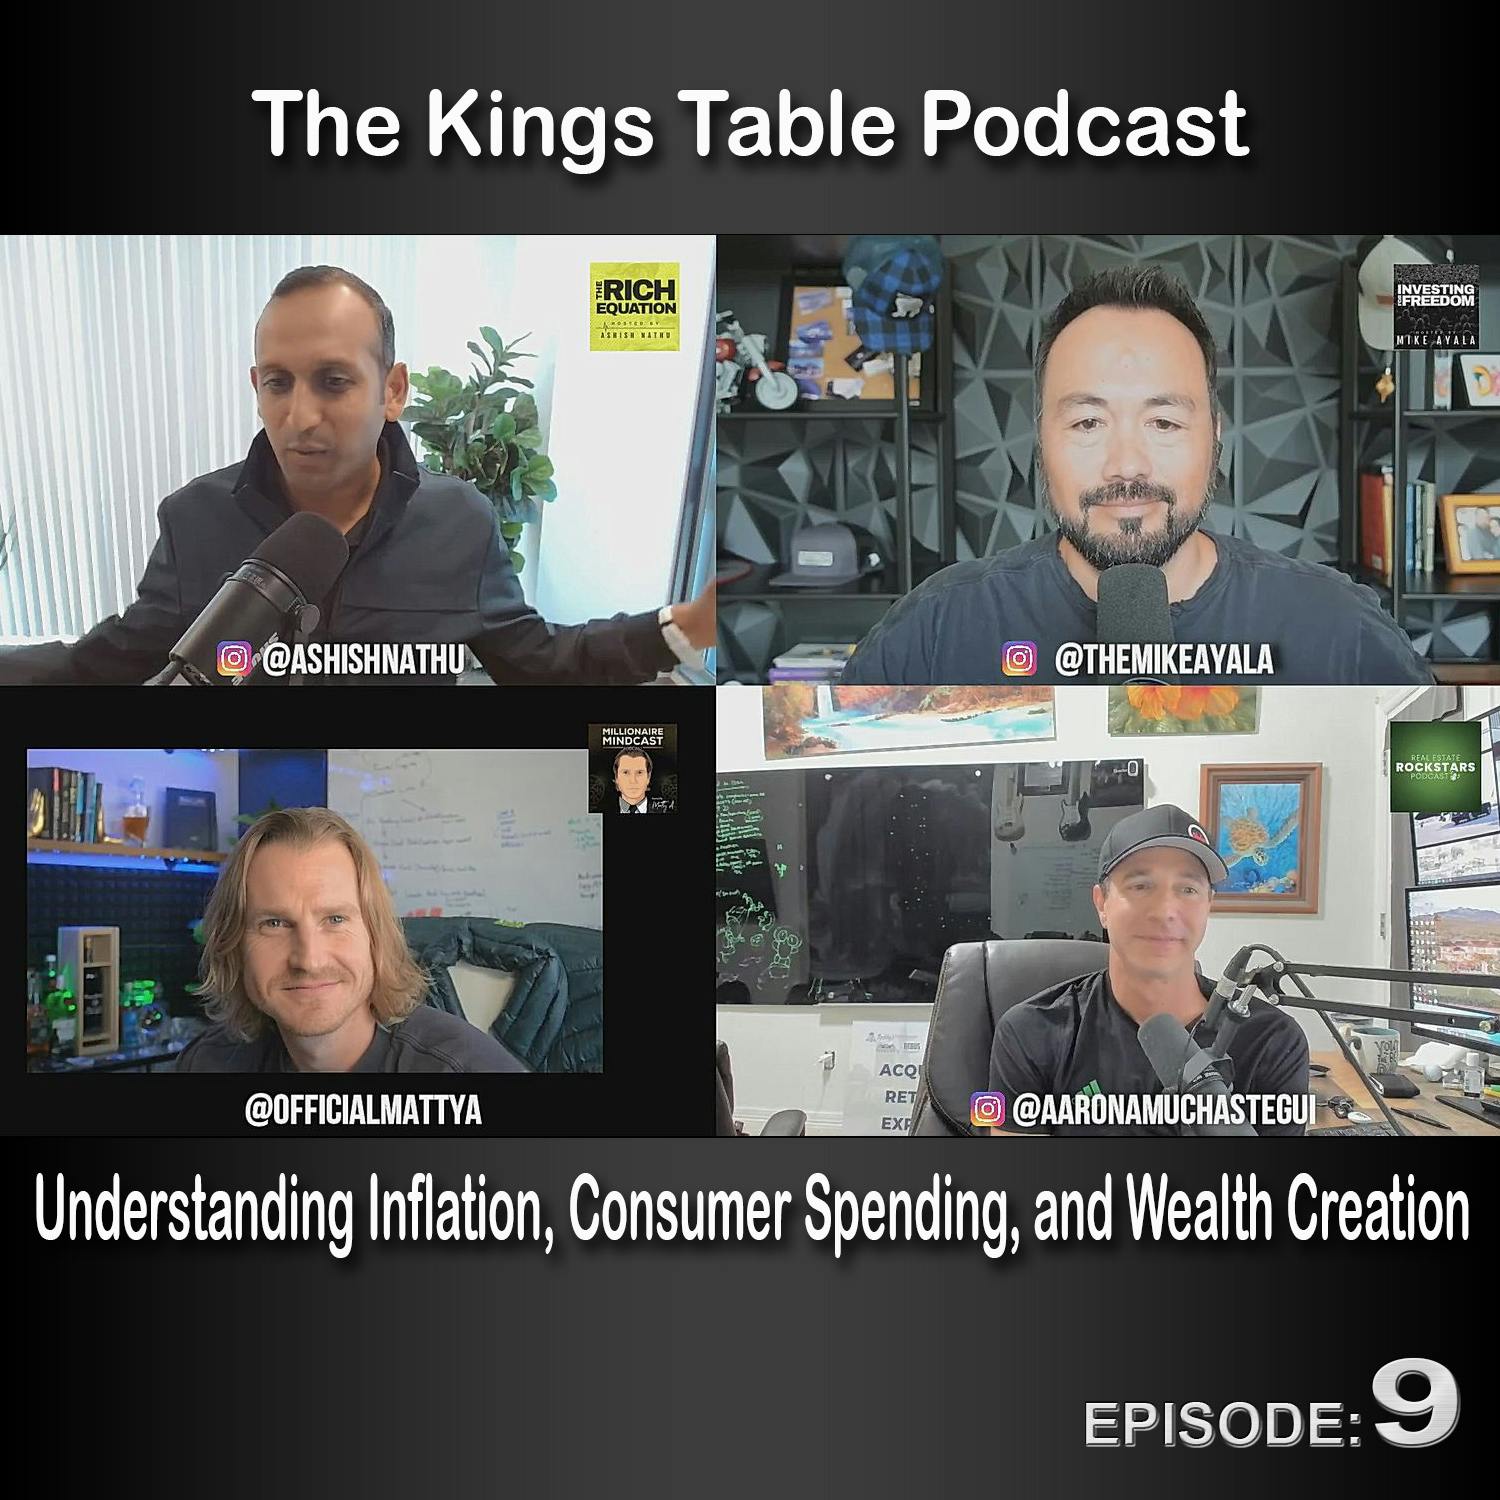 The Kings Table Episode 9 - Understanding Inflation, Consumer Spending, and Wealth Creation